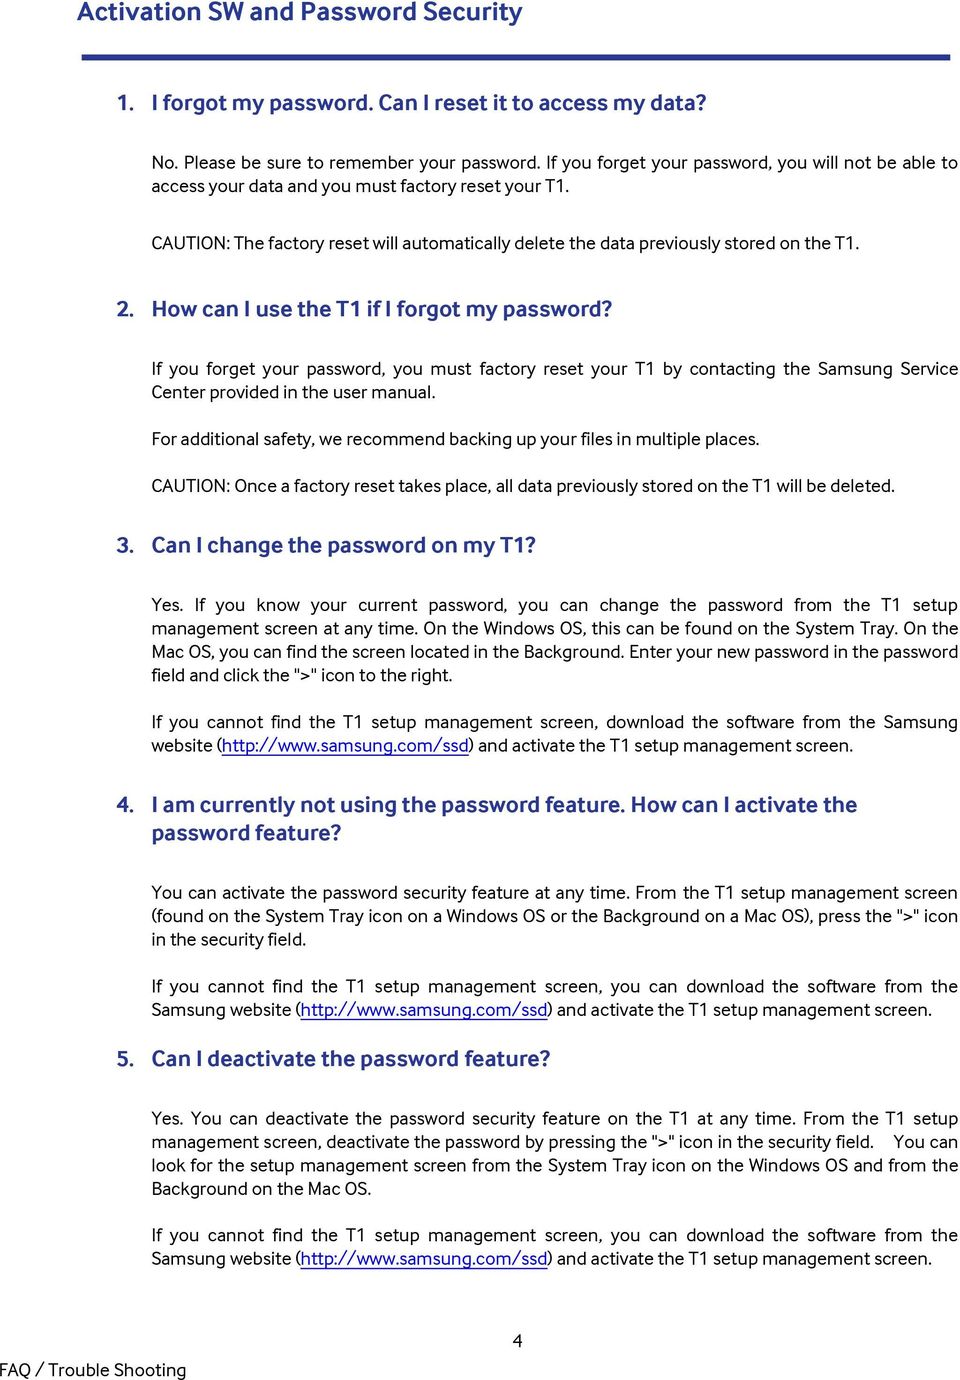 How can I use the T1 if I forgot my password? If you forget your password, you must factory reset your T1 by contacting the Samsung Service Center provided in the user manual.